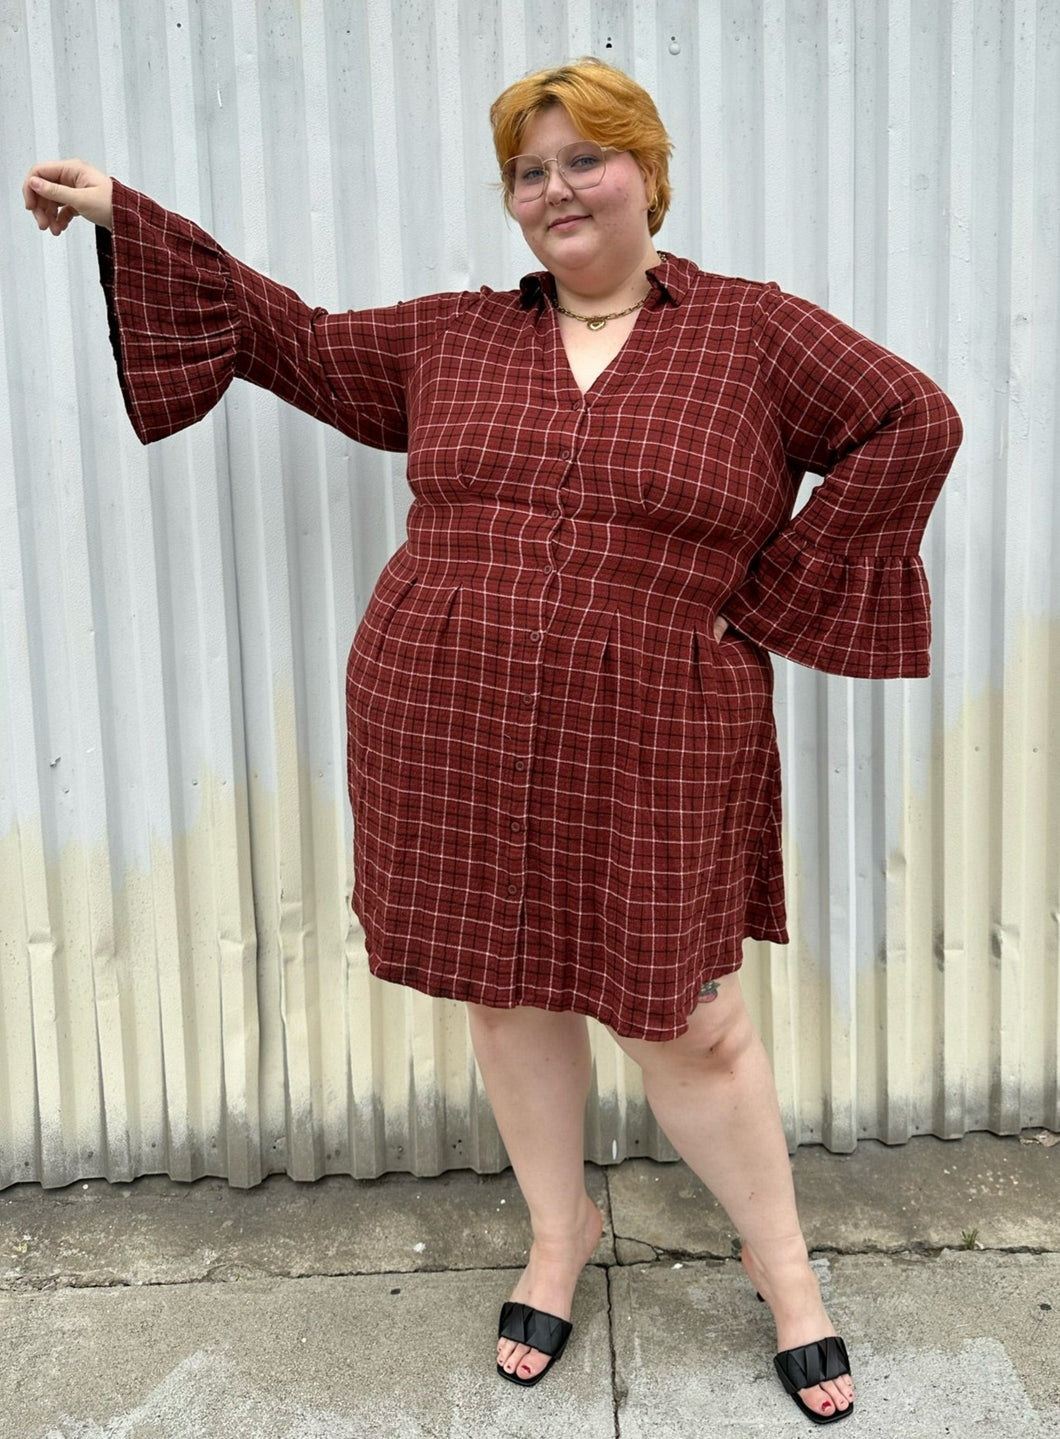 Full-body front view of size 3 Torrid brick red plaid pattern bell sleeve button-up shirt dress styled with black heels on a size 22/24 model. The photo is taken outside in natural lighting.